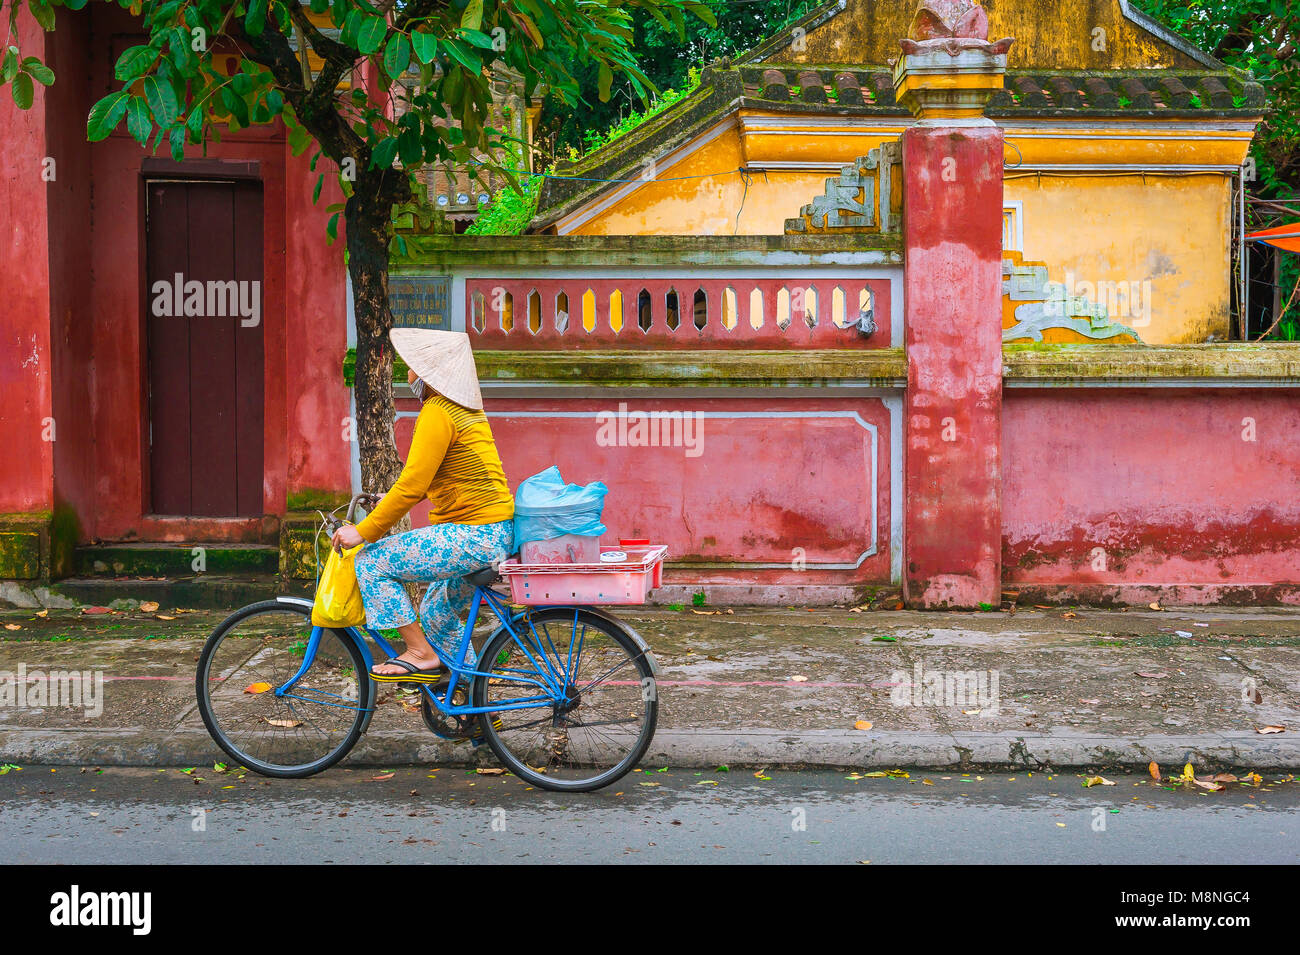 Woman bicycle Hoi An, a woman wearing a conical hat cycles past colourful walls in the Old Town quarter of Hoi An, Central Vietnam. Stock Photo